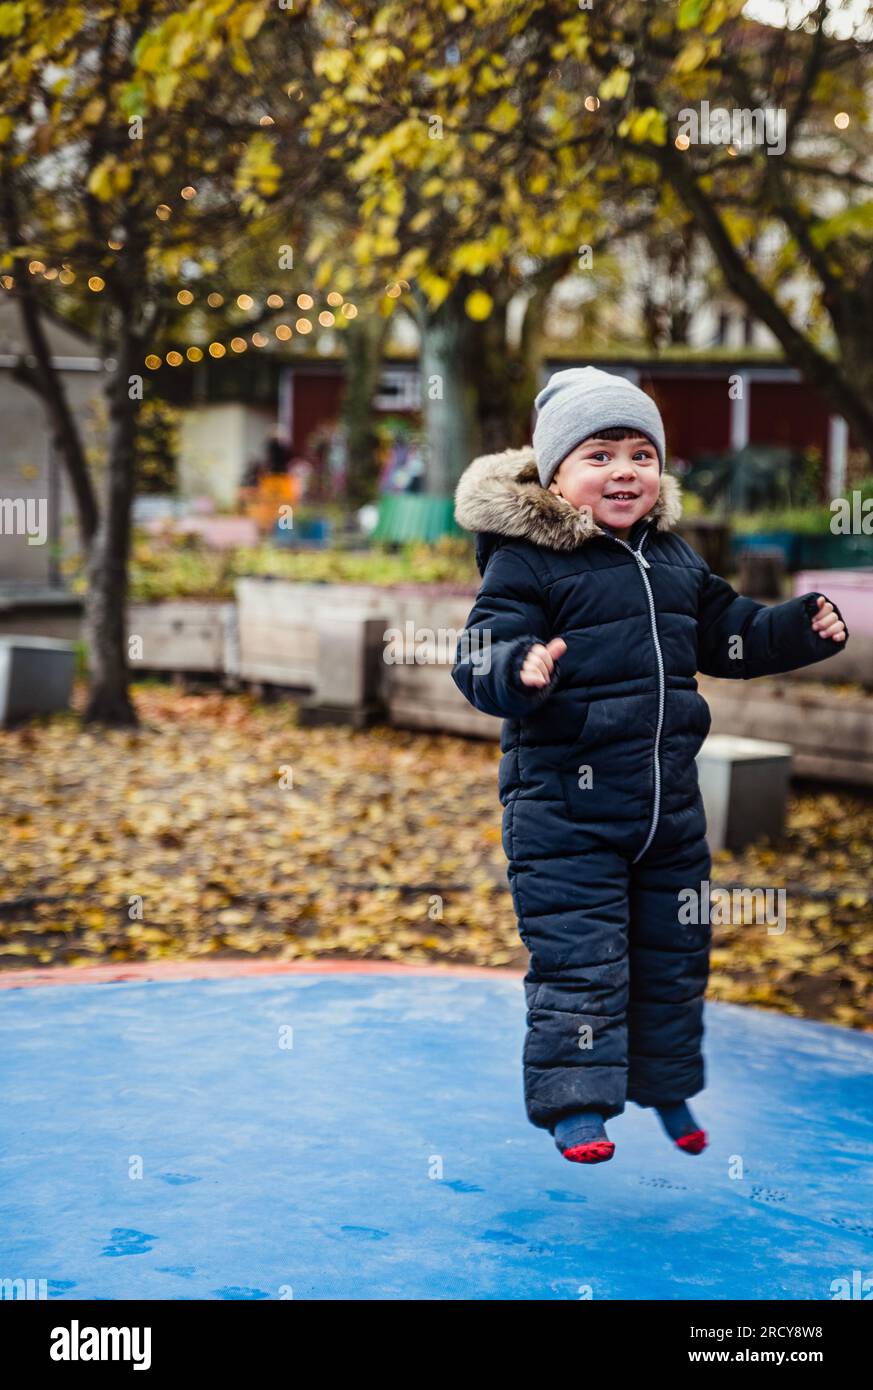 Enthusiast child jumping on a soft trampoline feels protected on a morbid surface. Safeness and protection concept with relaxed kid jumping on bouncer Stock Photo